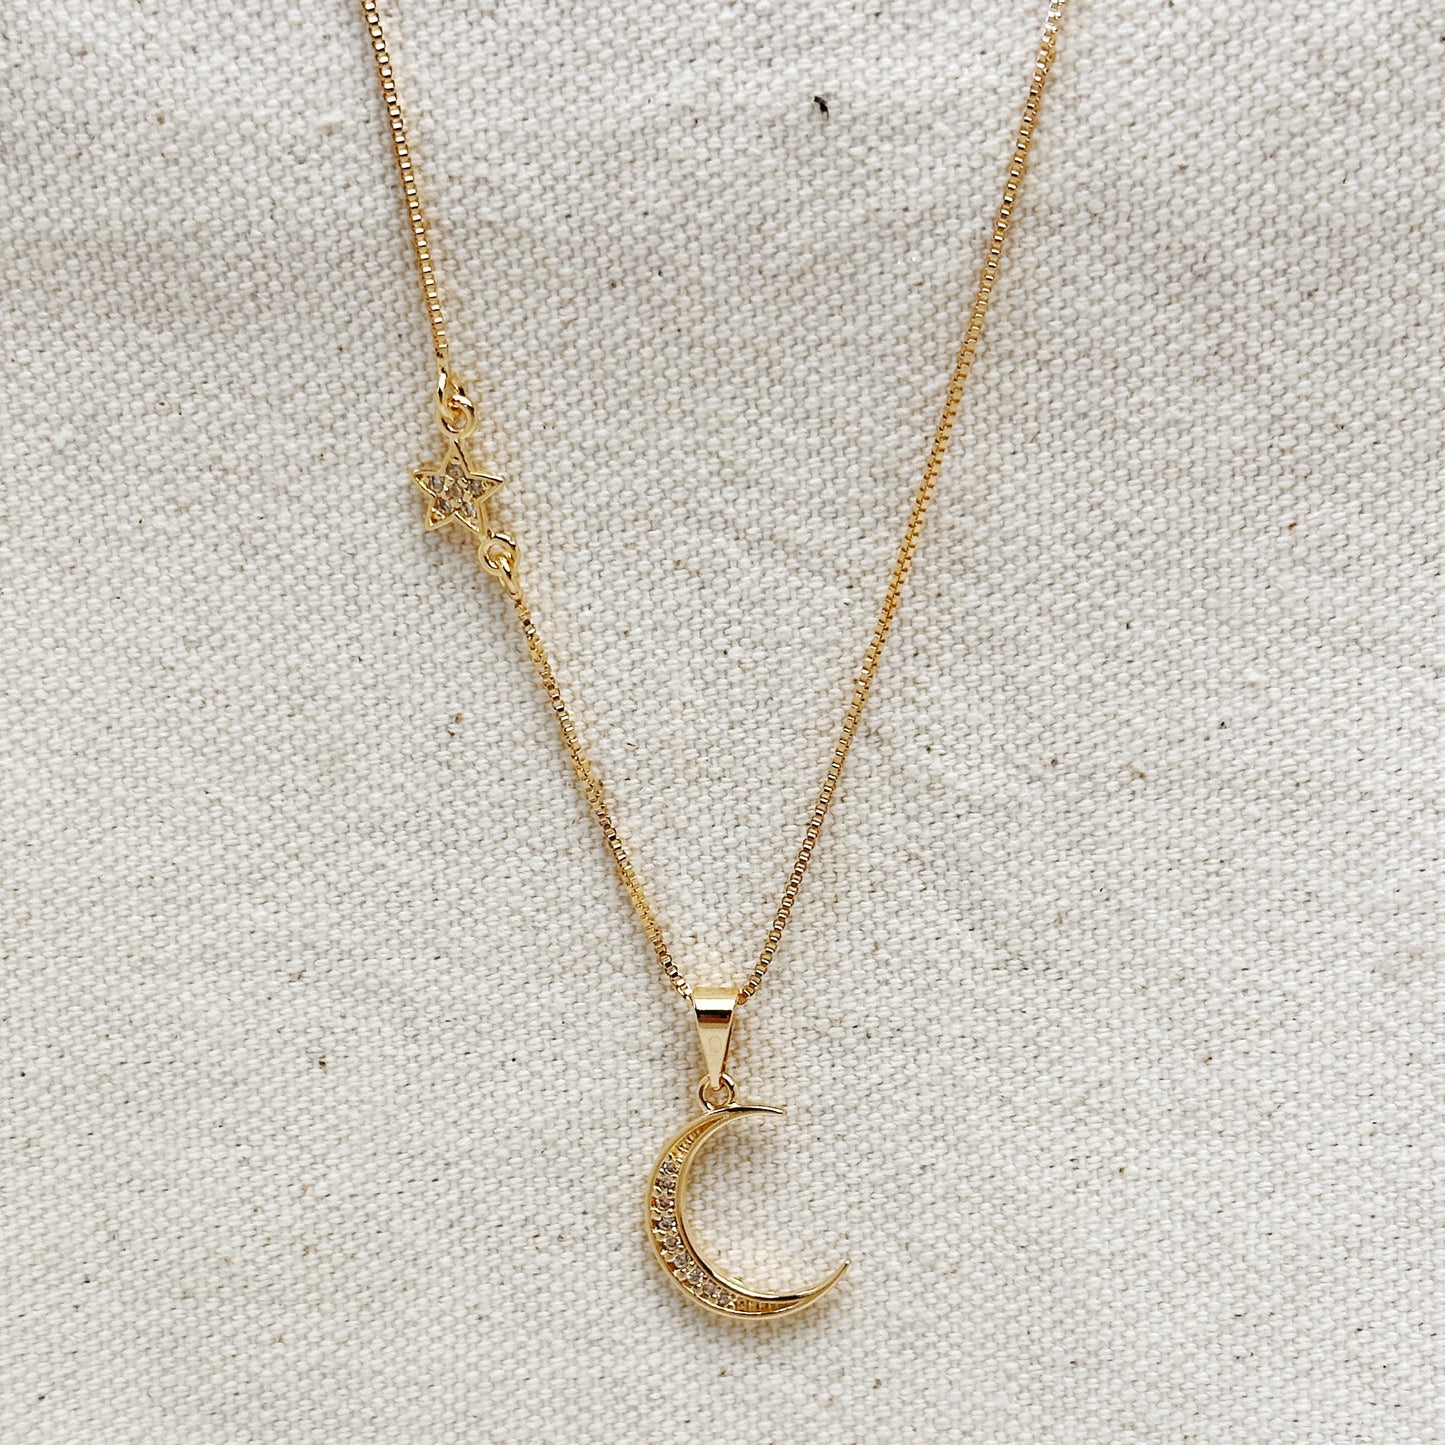 Moon and Star Necklace 18k Gold Filled